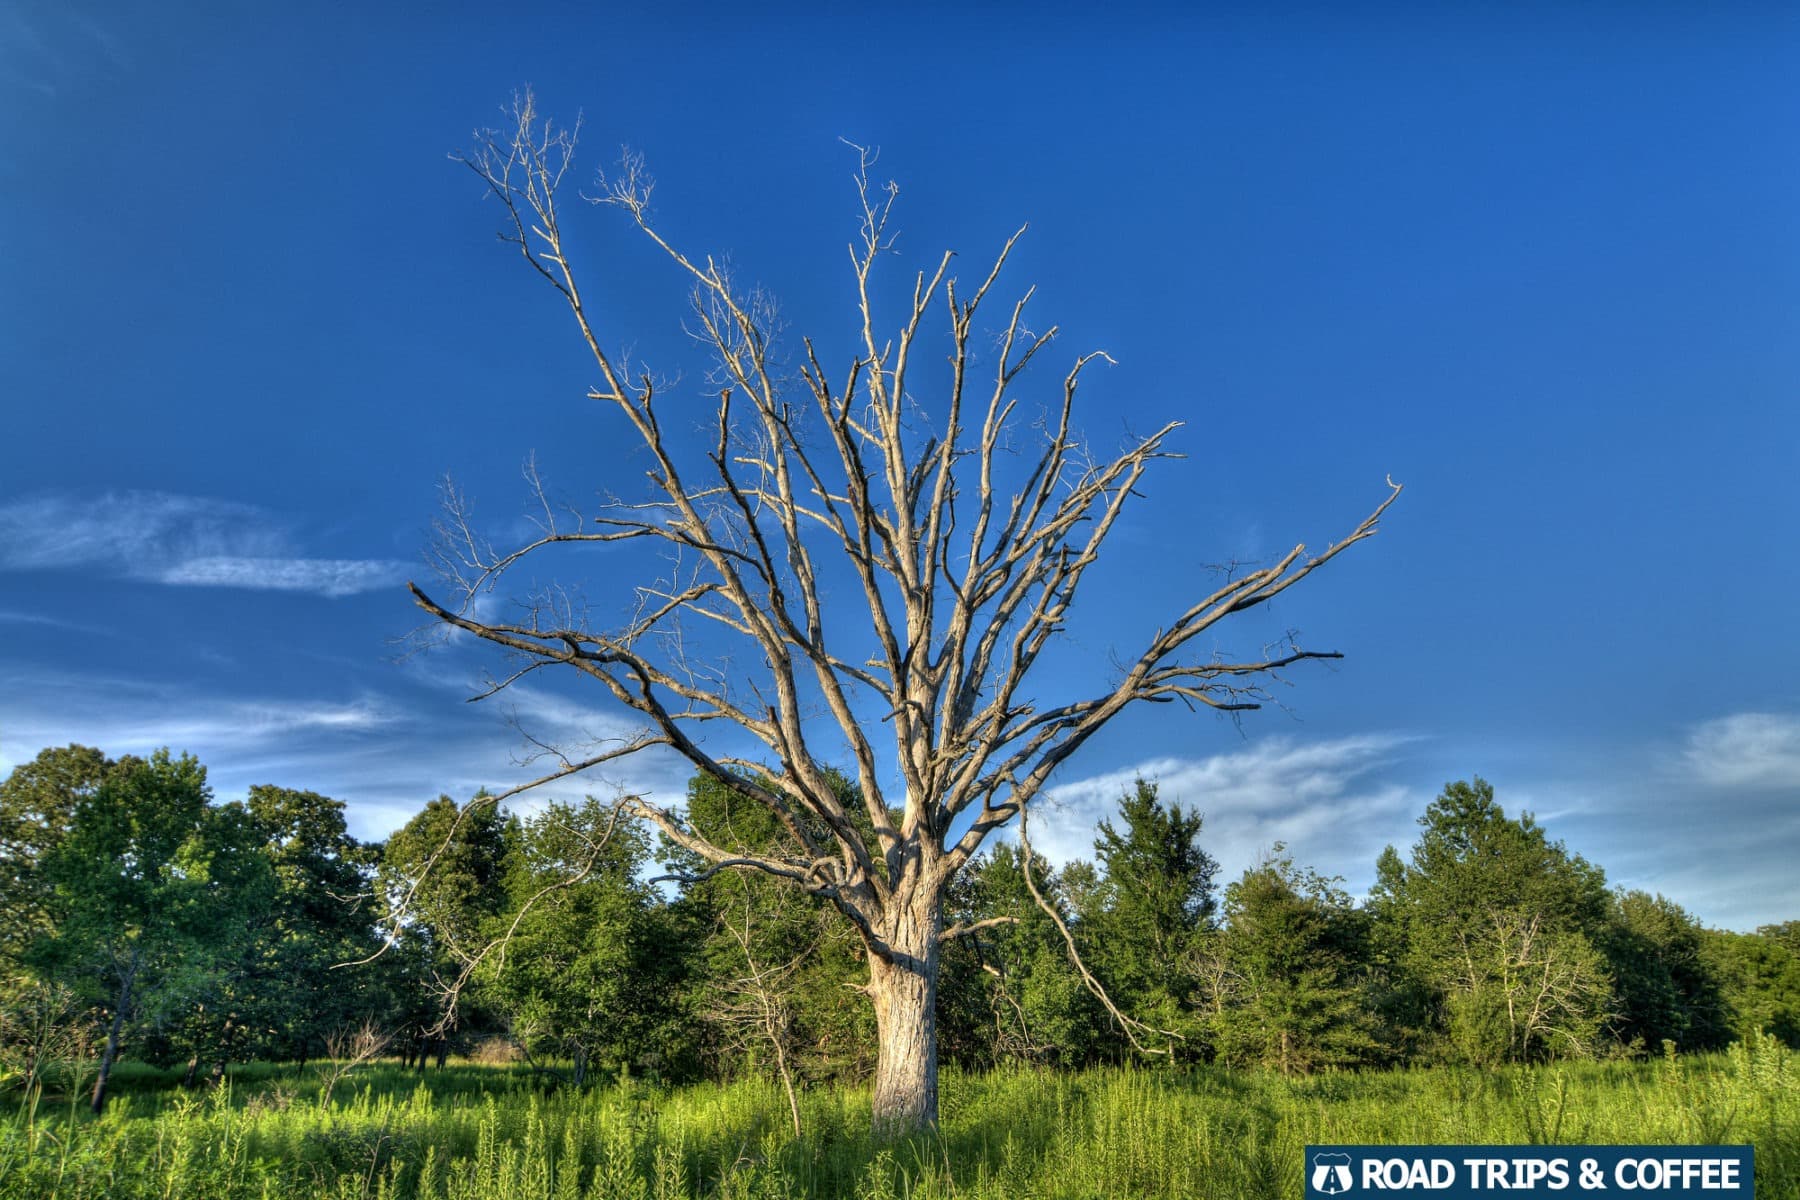 An enormous deadwood tree standing in a lush green field beneath a deep blue sky in the Elk & Bison Prairie in Land Between the Lakes National Recreation Area